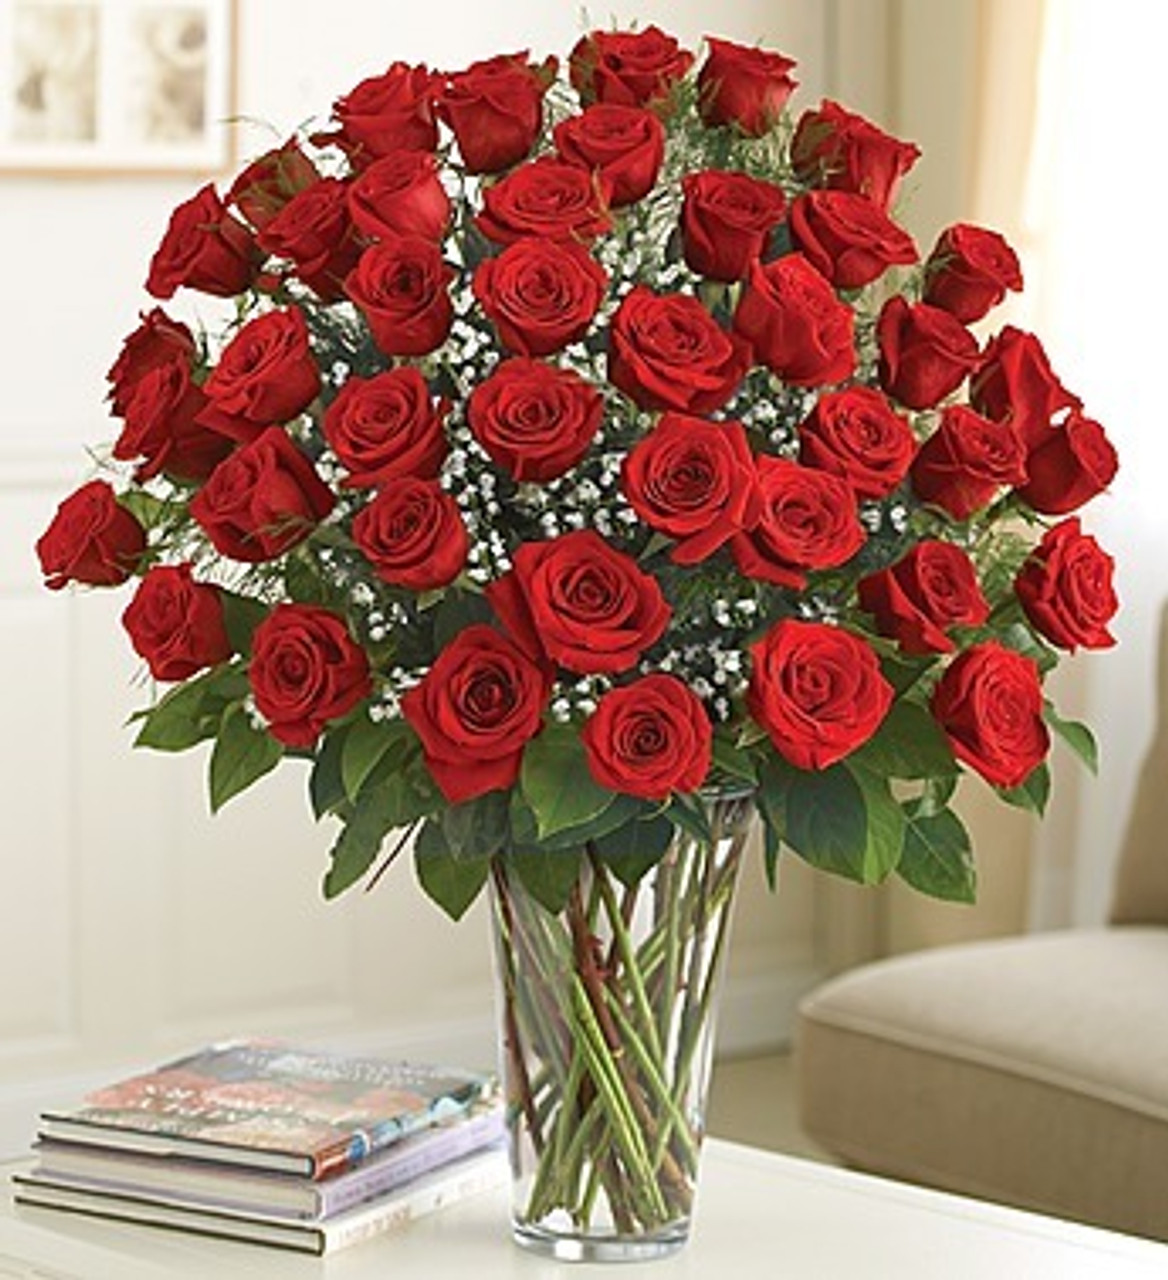 Luxury One Dozen Red Roses Bundle at From You Flowers